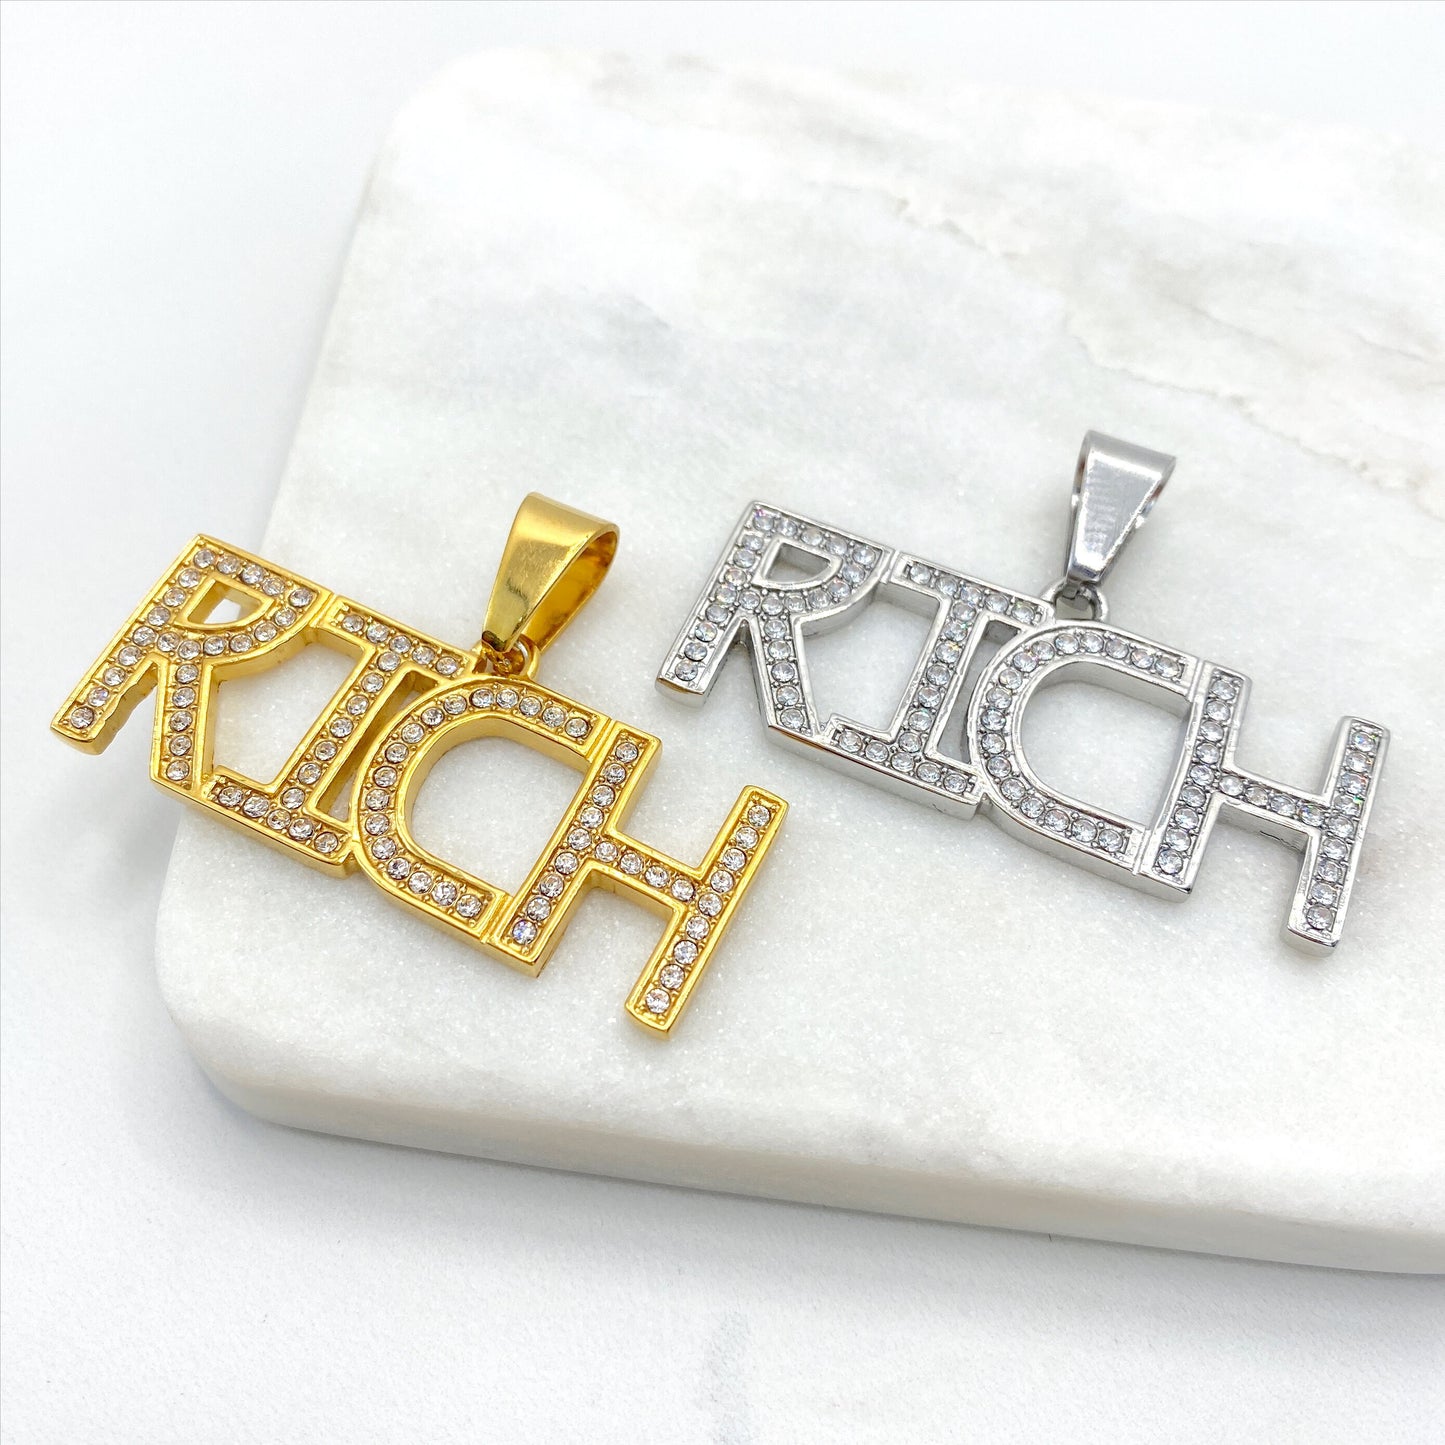 Stainless Steal with Clear Cubic Zirconia ''Rich'' Word Letter Charms Pendant, Gold or Silver, Wholesale Jewelry Making Supplies